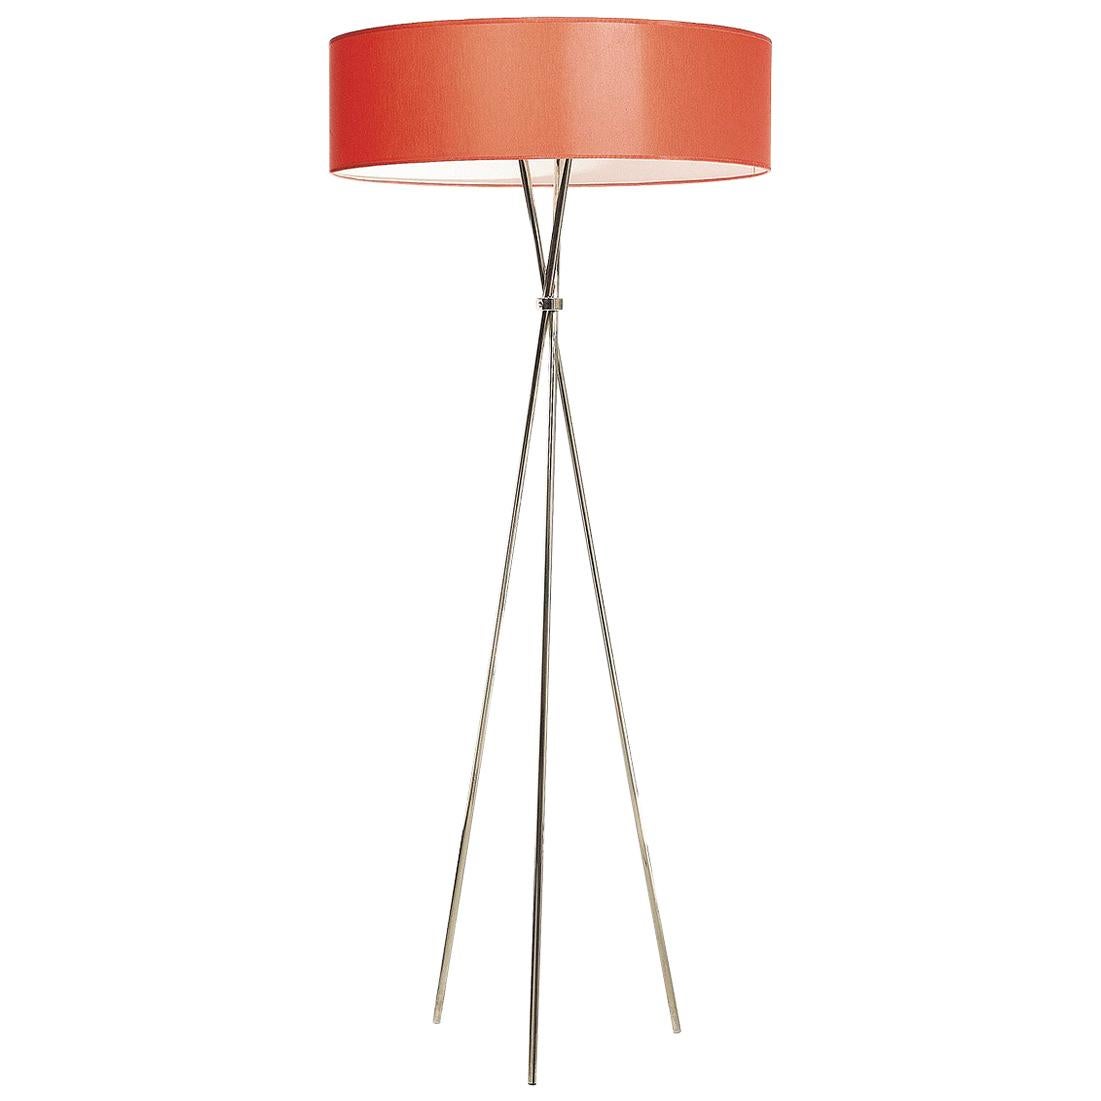 Very elegant floor-lamp with a big carton-shade.
Color on request
Most components according to the UL regulations, with an additional charge we will UL-list and label our fixtures.